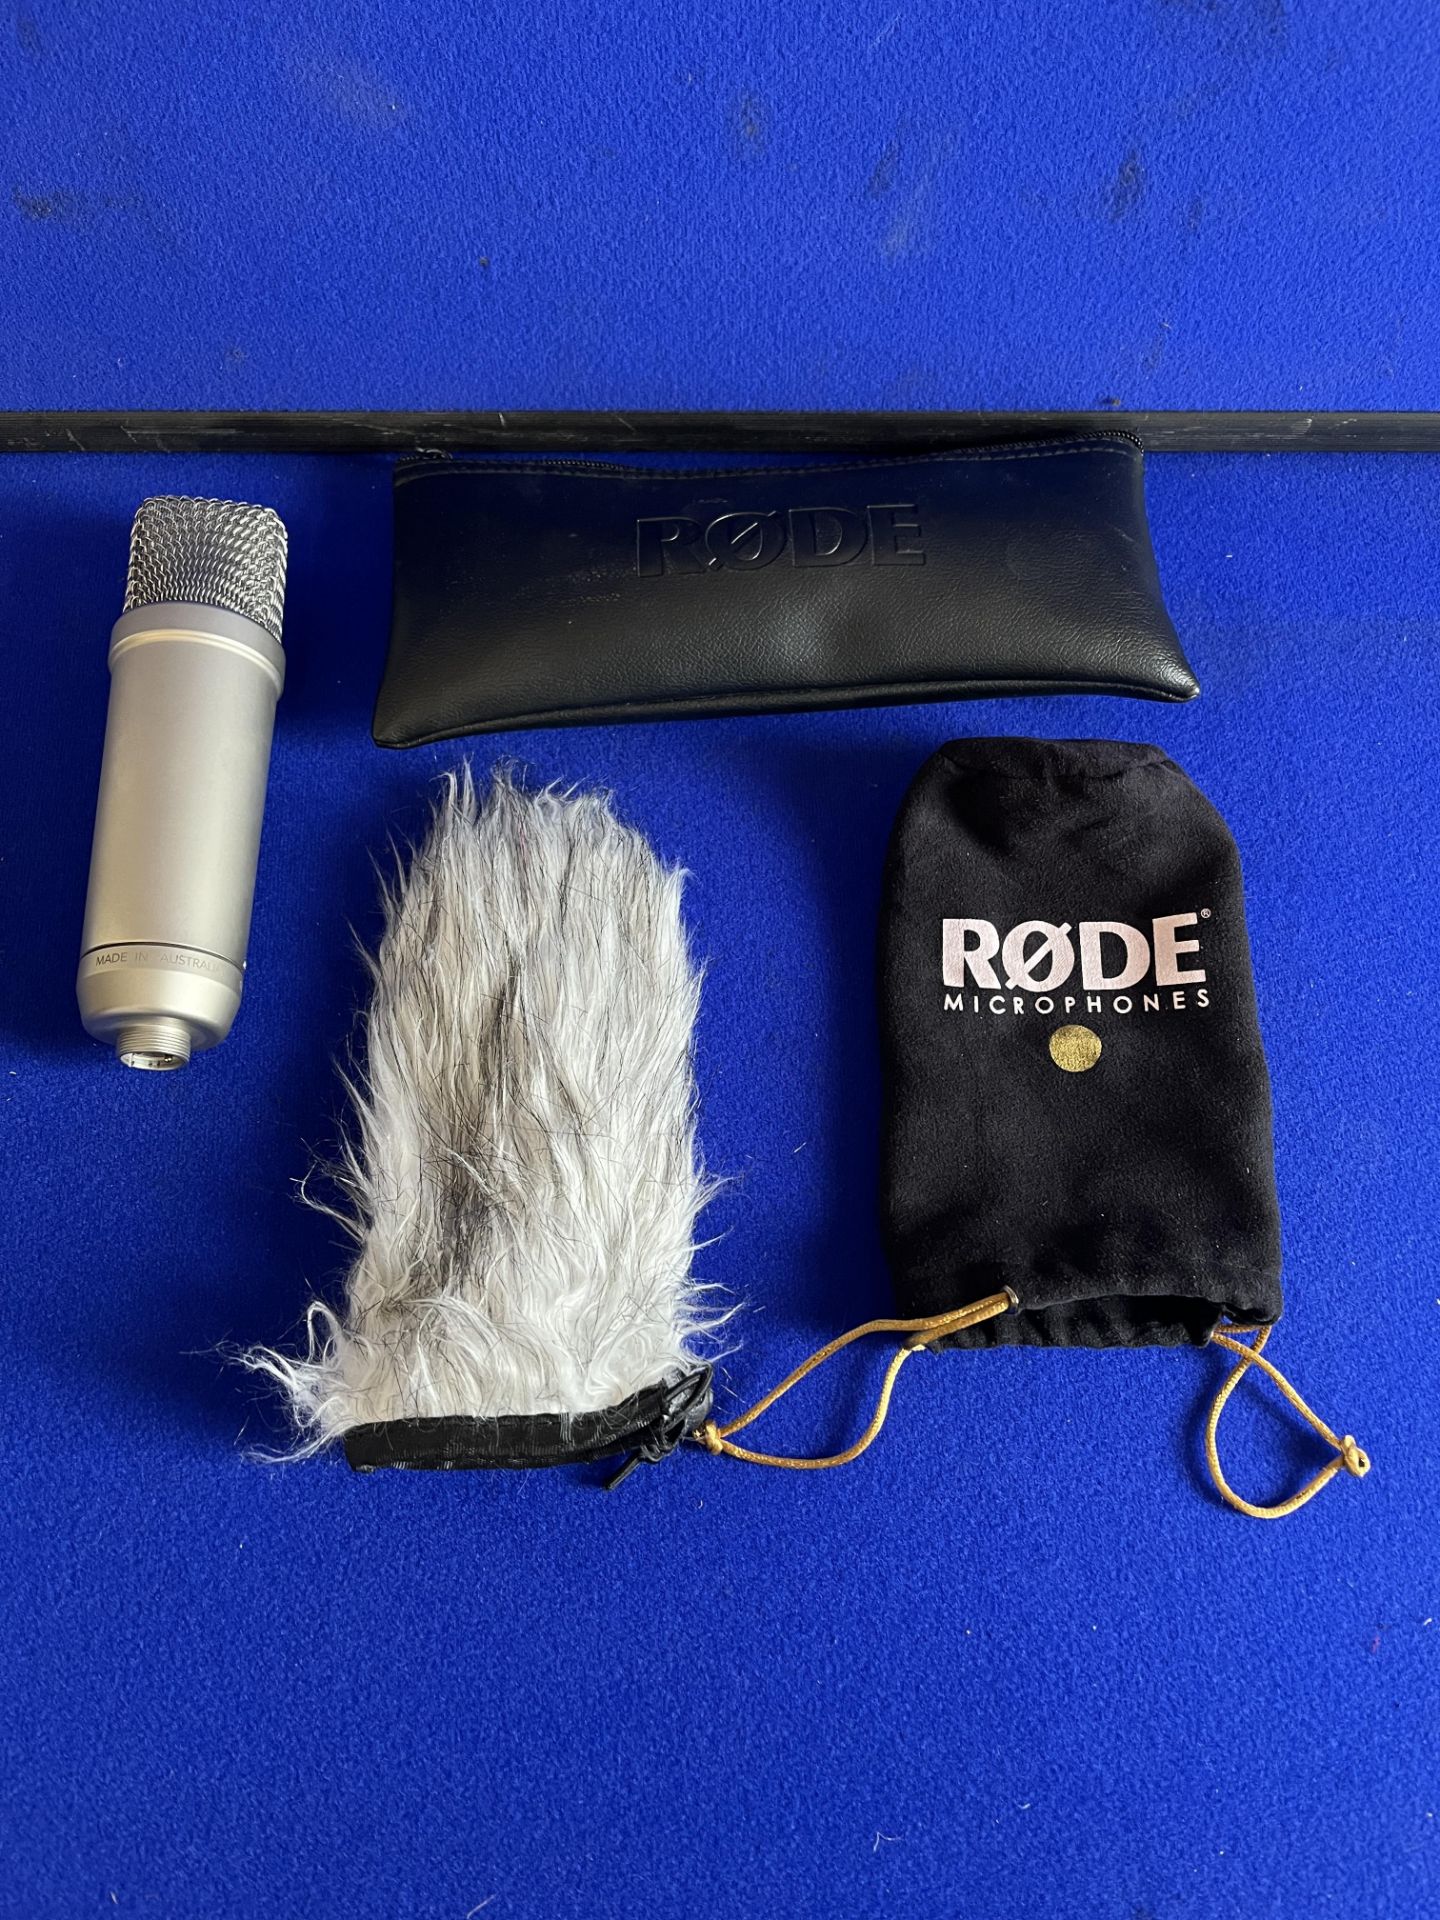 Rode NTA-1 Microphone with accessories